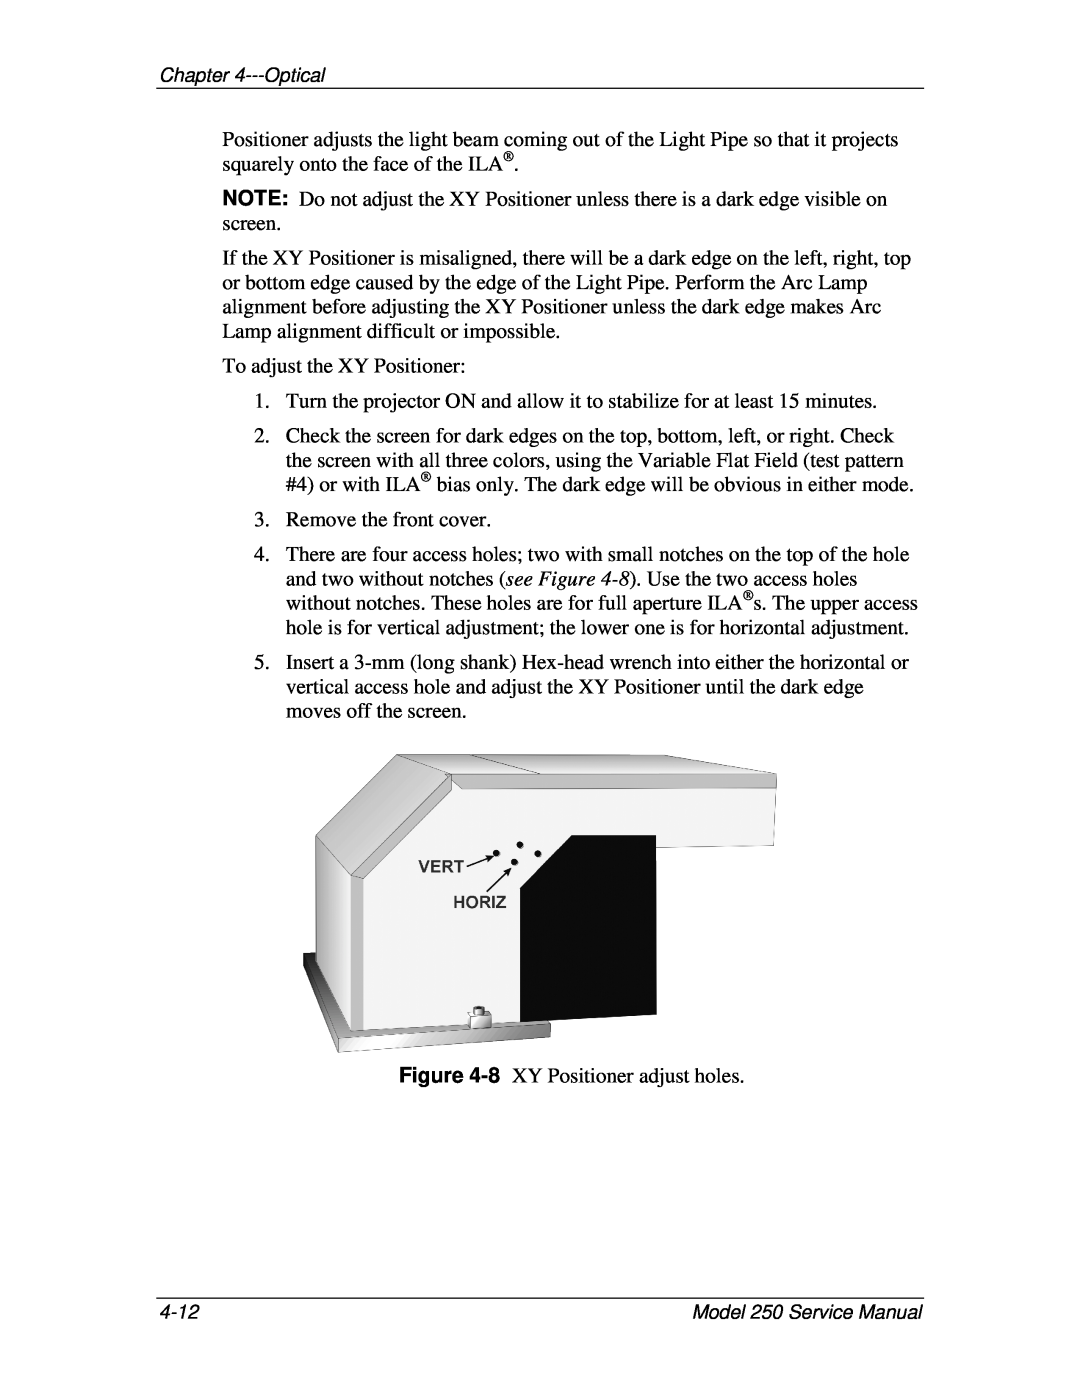 JVC 250 service manual To adjust the XY Positioner 